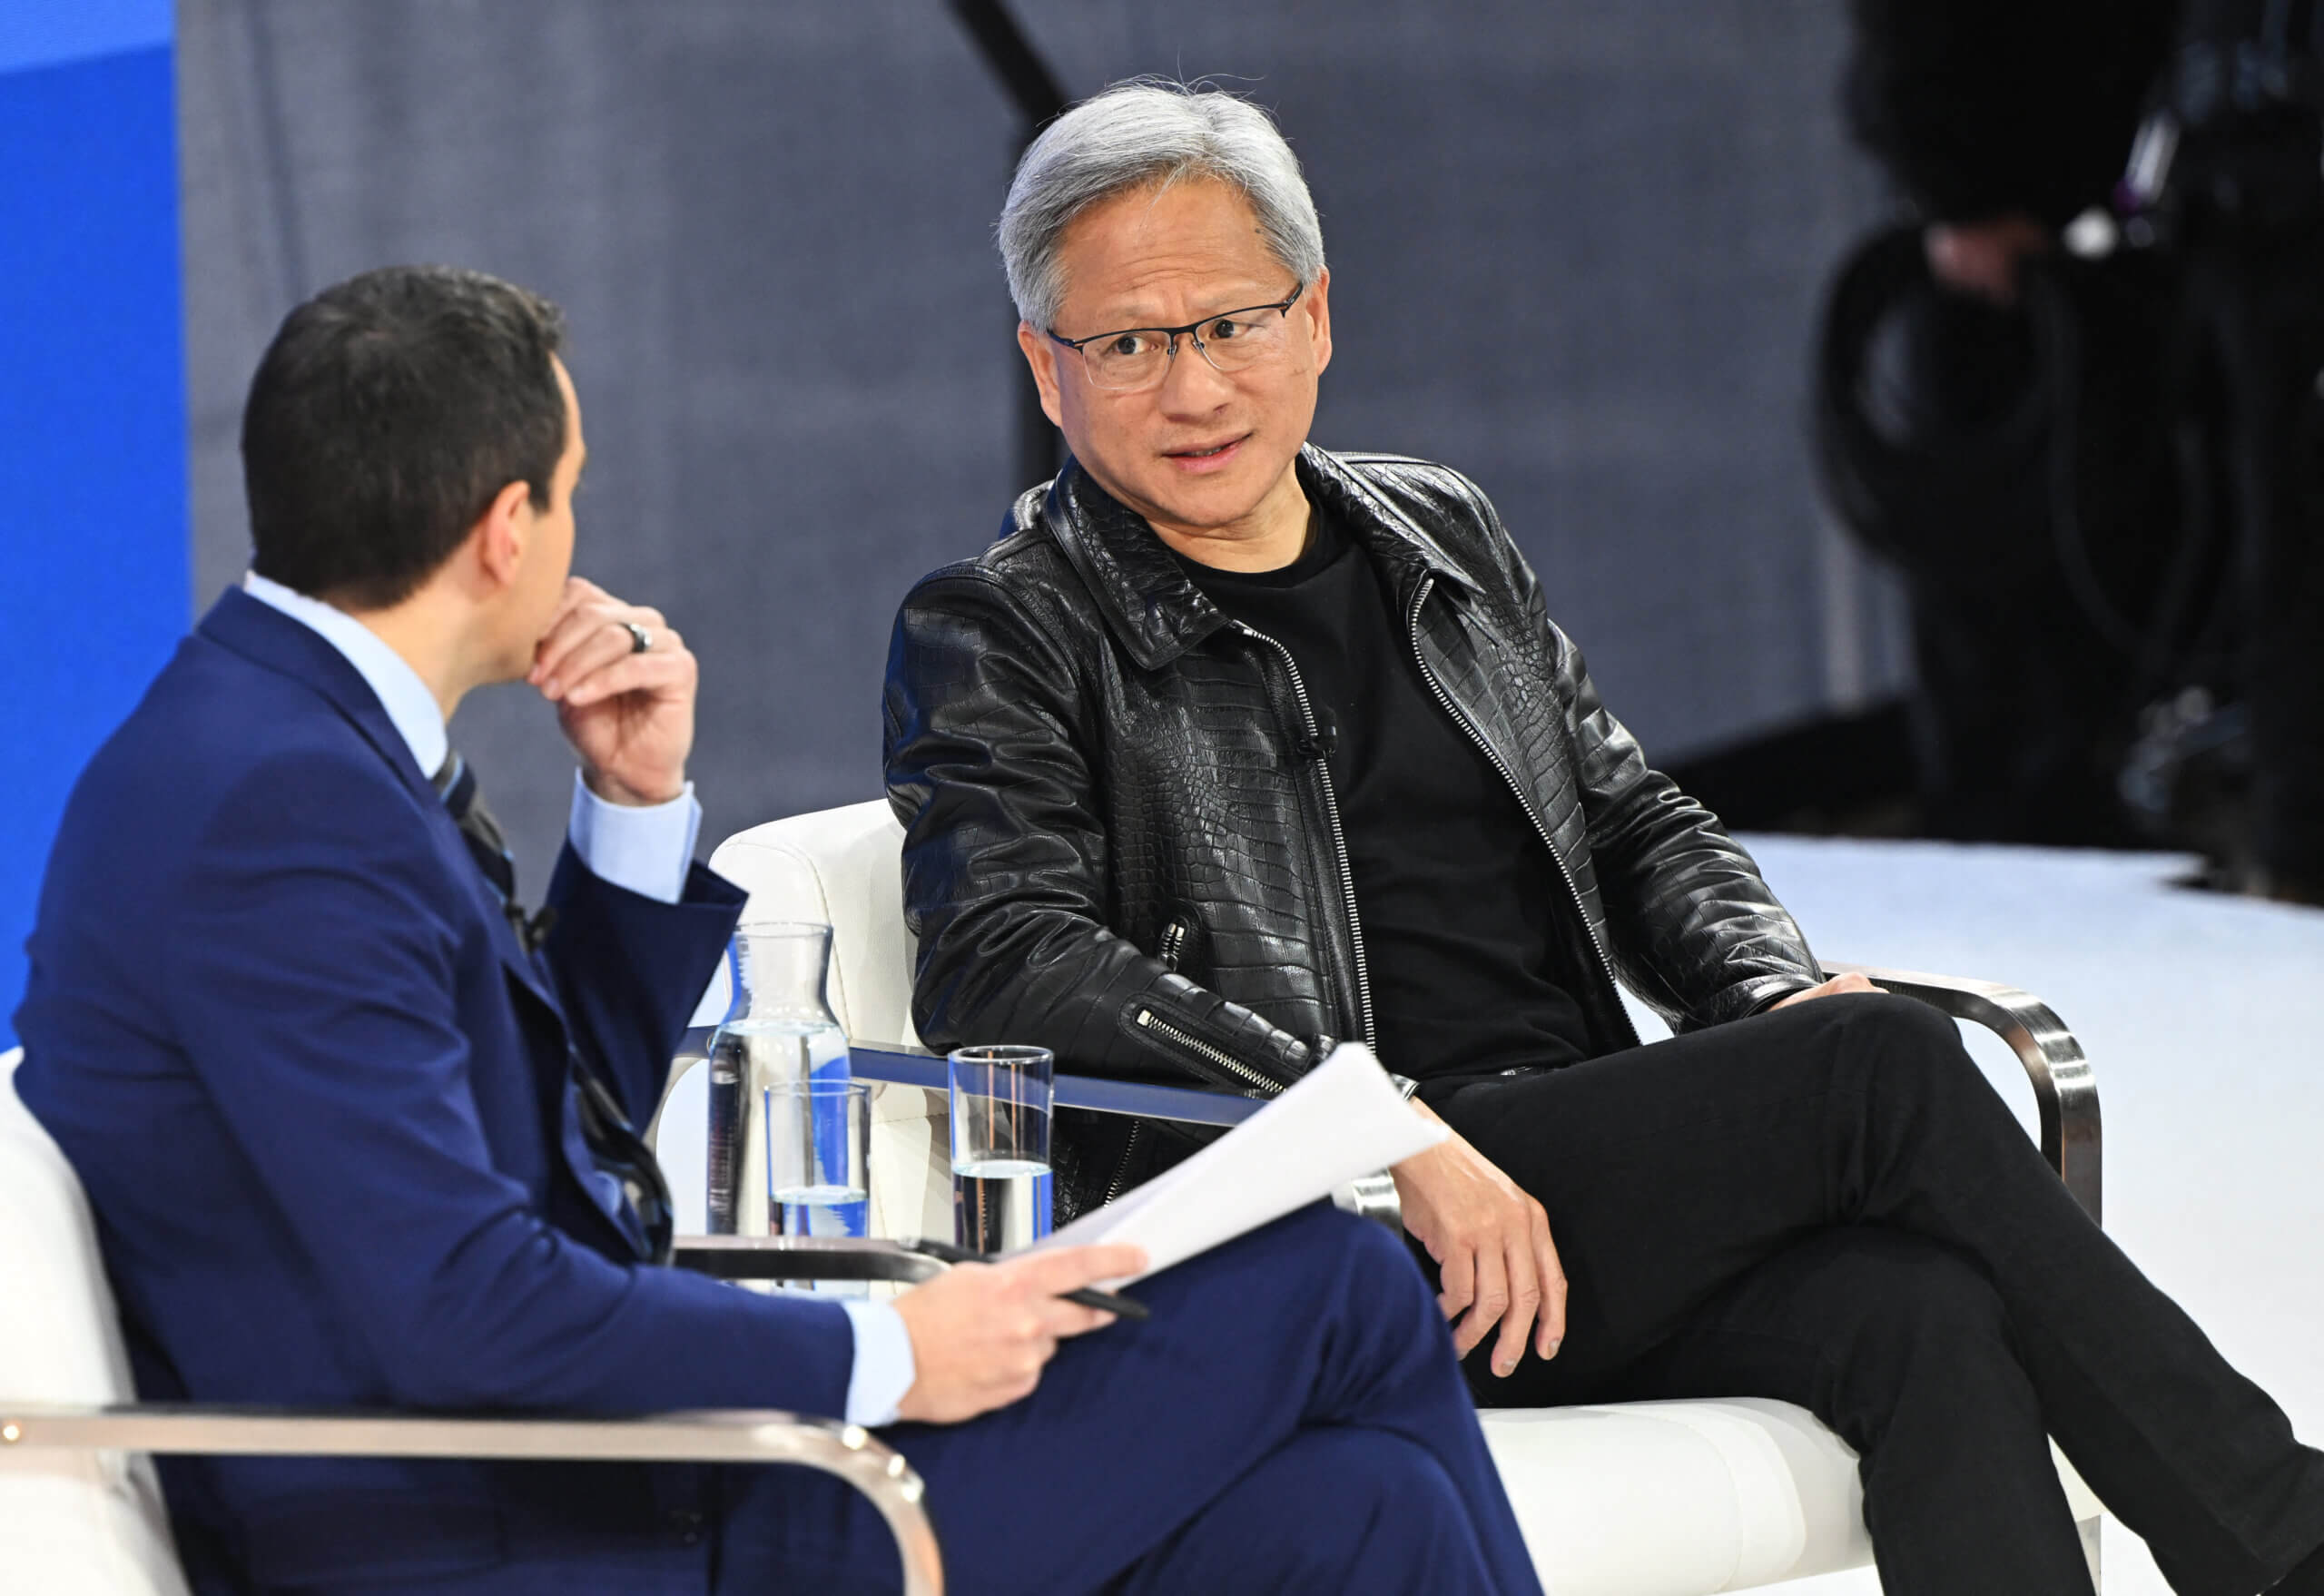 (L-R) Andrew Ross Sorkin and Nvidia CEO Jensen Huang speak onstage during The New York Times Dealbook Summit 2023 at Jazz at Lincoln Center on November 29, 2023 in New York City. Slaven Vlasic/Getty Images for The New York Times/AFPJensen Huang (Photo by Slaven Vlasic / GETTY IMAGES NORTH AMERICA / Getty Images via AFP)